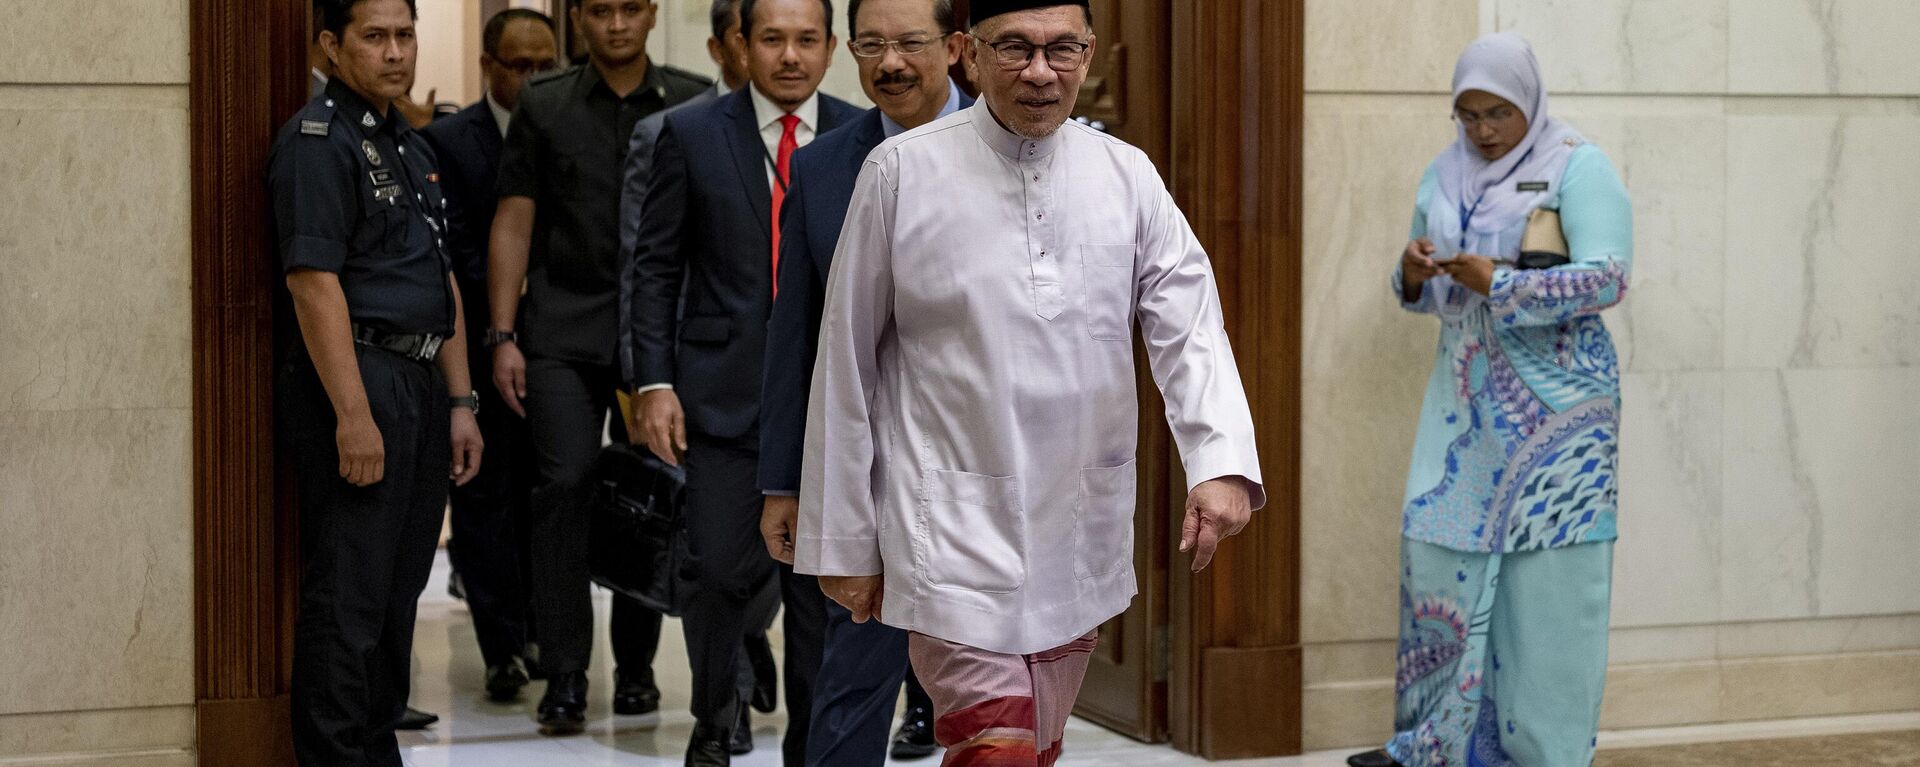 In this photo provided by Prime Minister Office, Malaysia's Prime Minister Anwar Ibrahim, front, arrives at the prime minister's office in Putrajaya, Malaysia on his first day Friday, Nov. 25, 2022. - Sputnik International, 1920, 25.11.2022